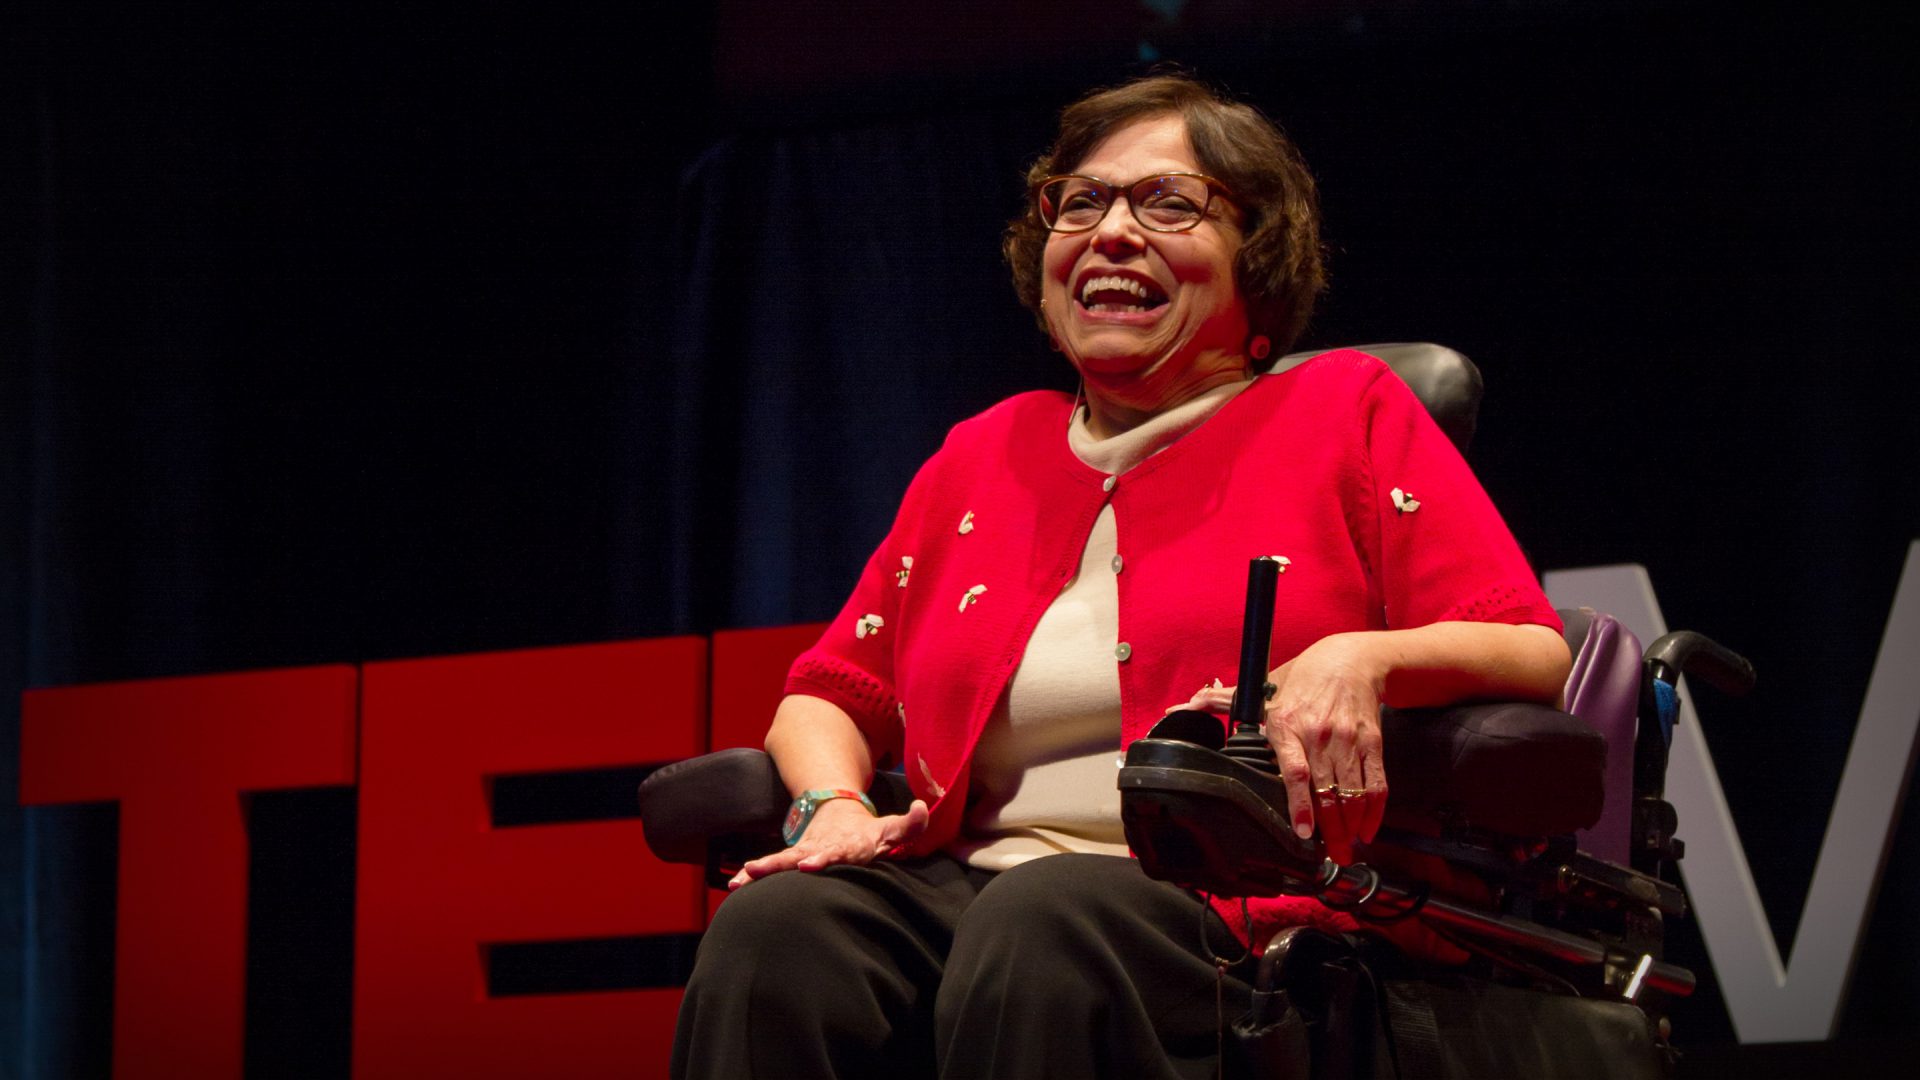 A picture of Judith Heumann speaking on stage at a TED Talk.